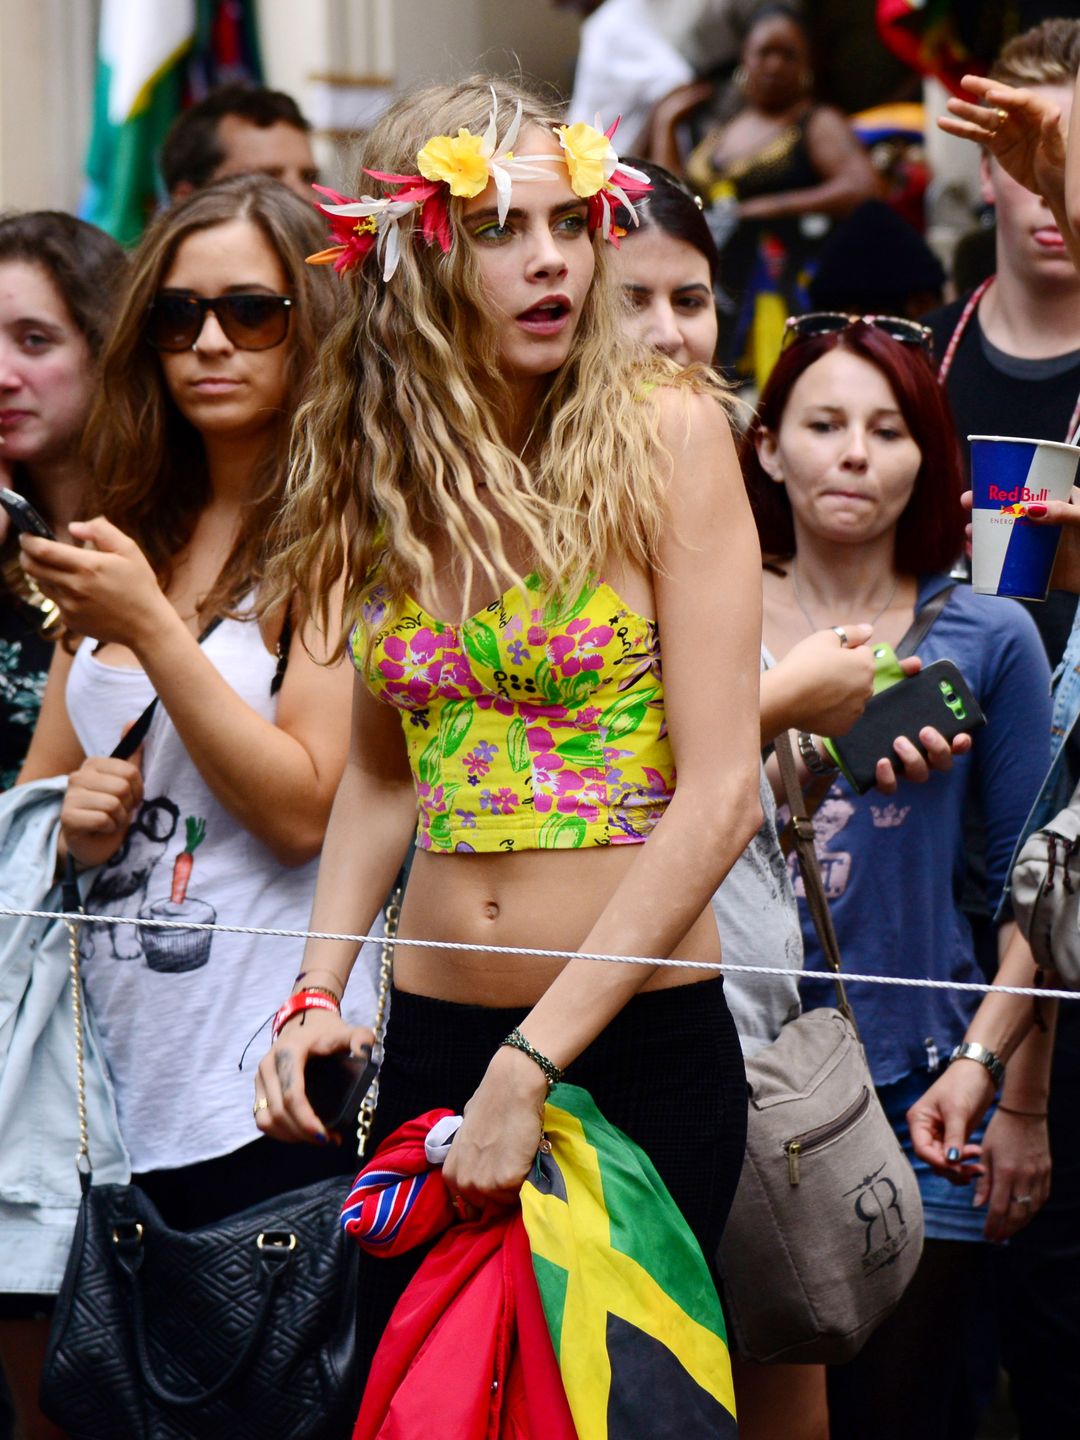 Cara Delevingne wearing a vibrant floral crop top at Notting Hill in 2013 